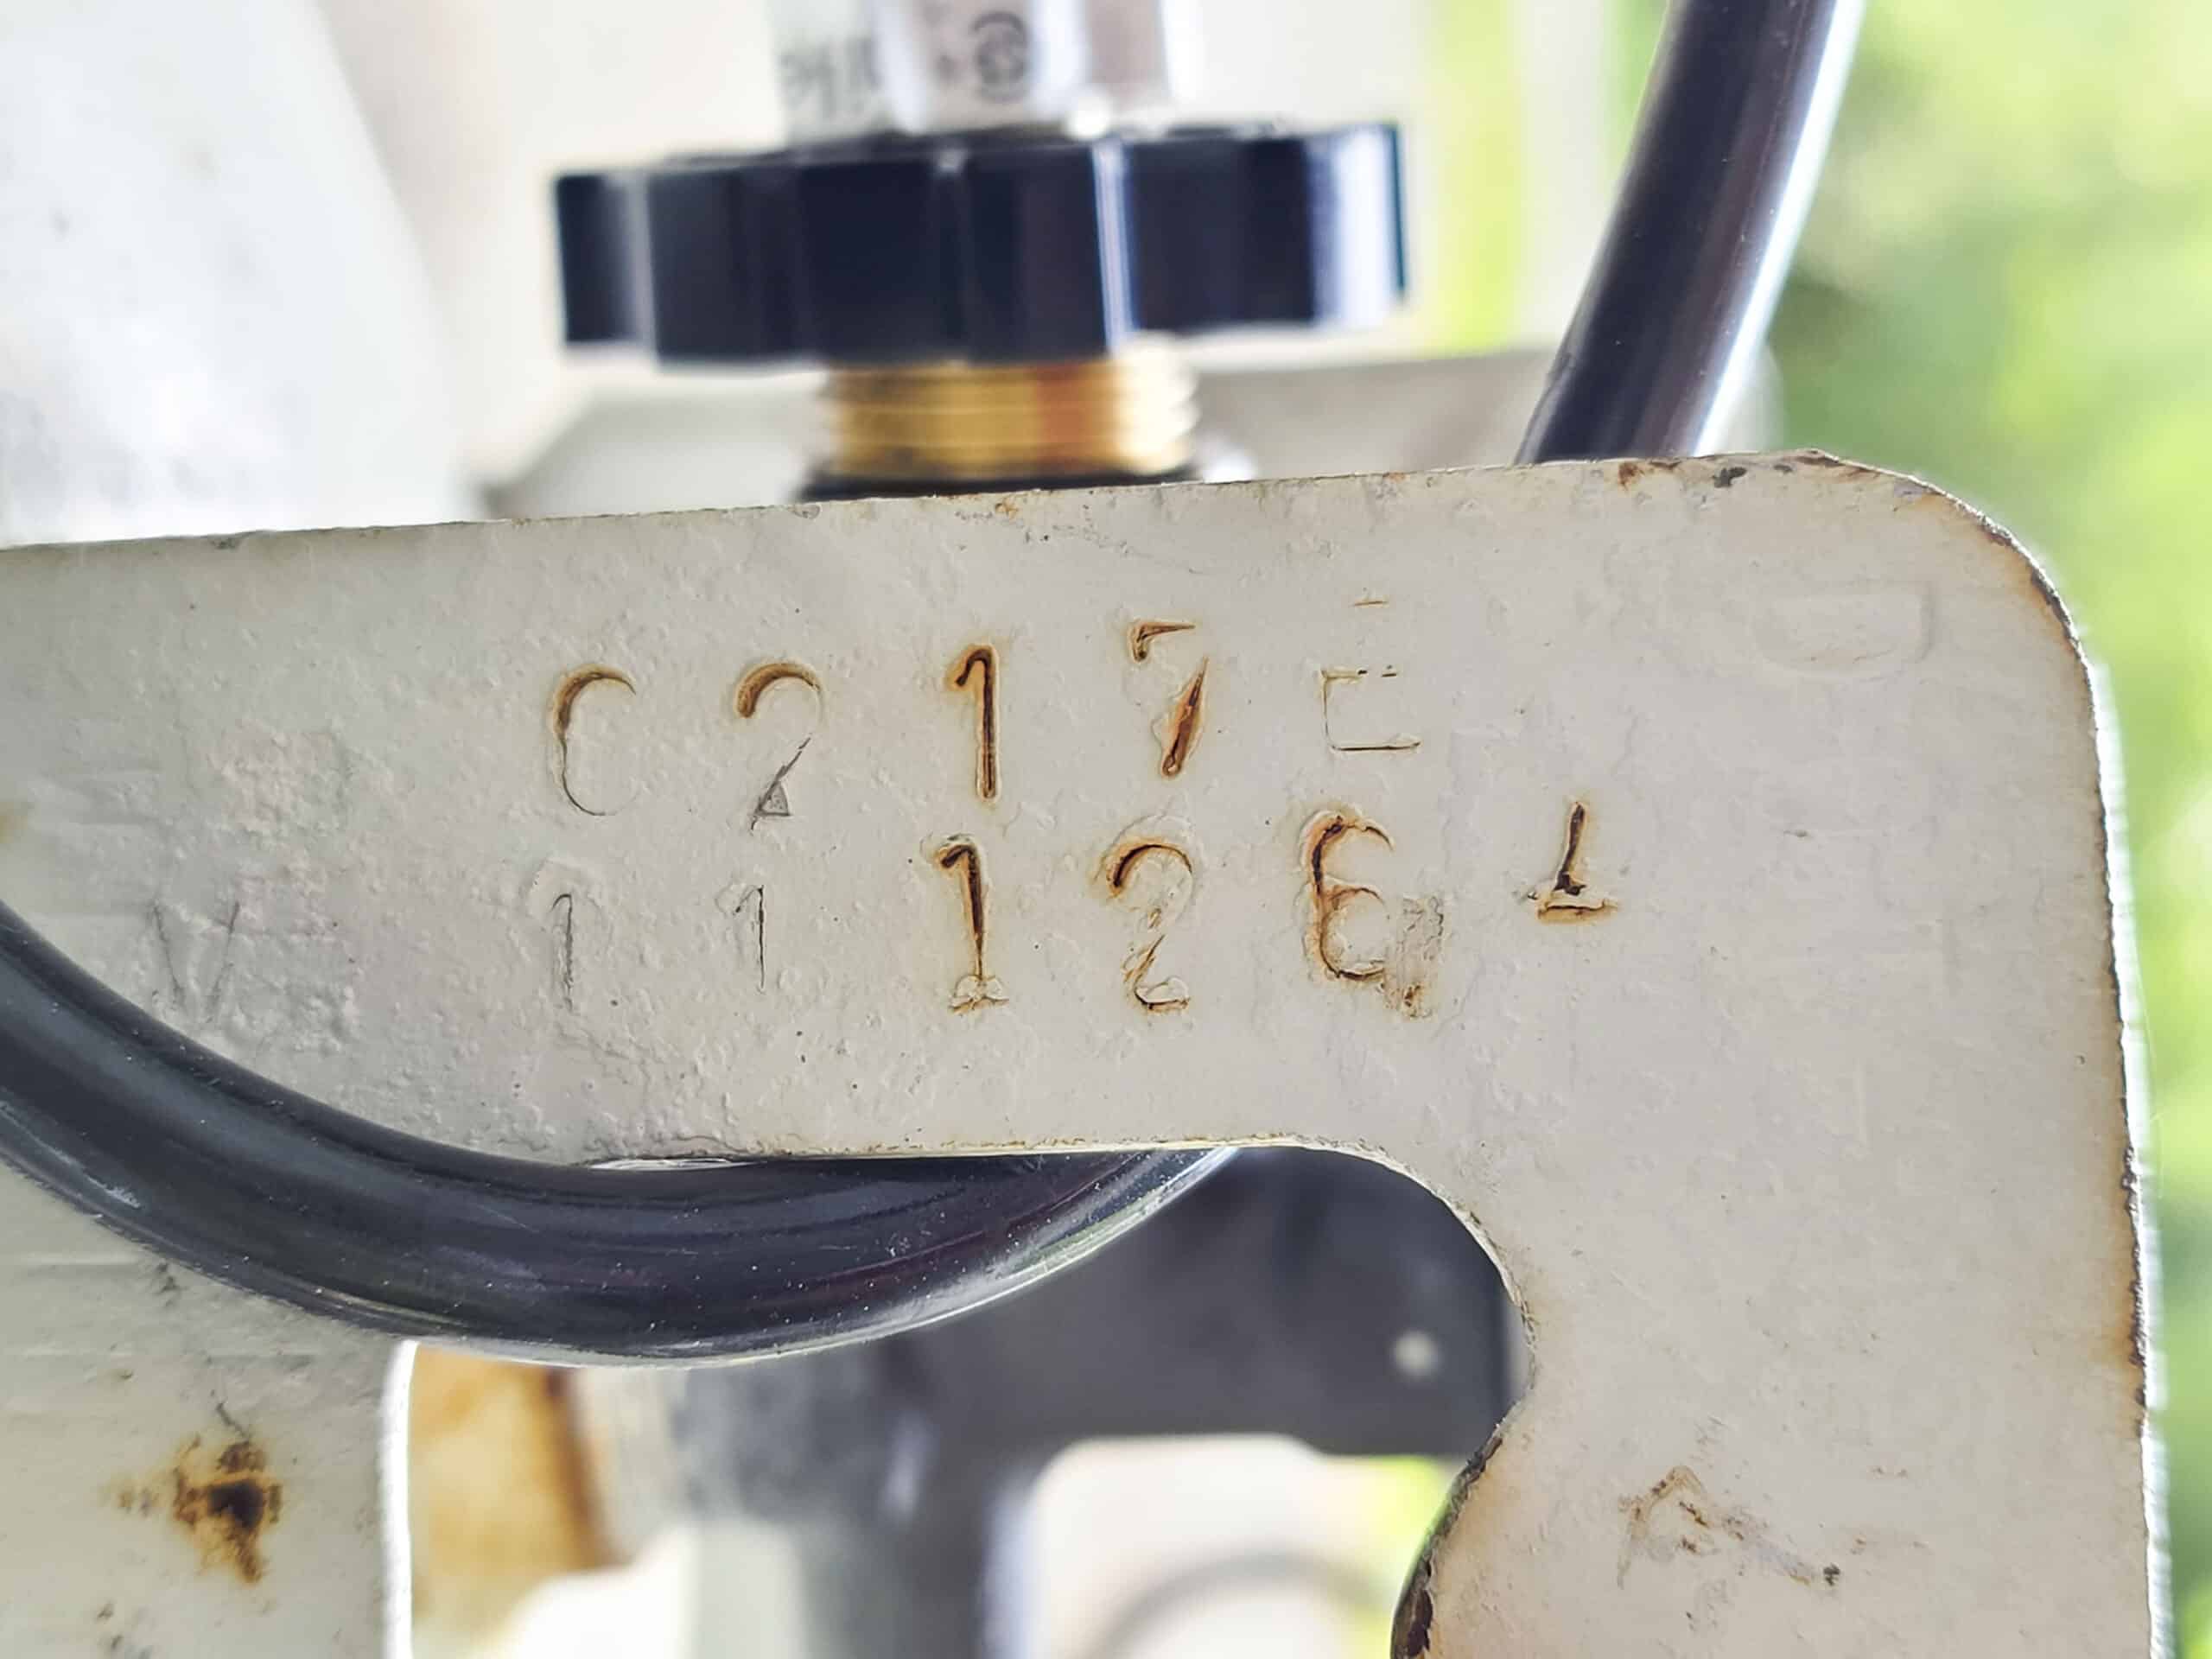 The handle of a white barbecue propane tank.  0217E is stamped on the handle.